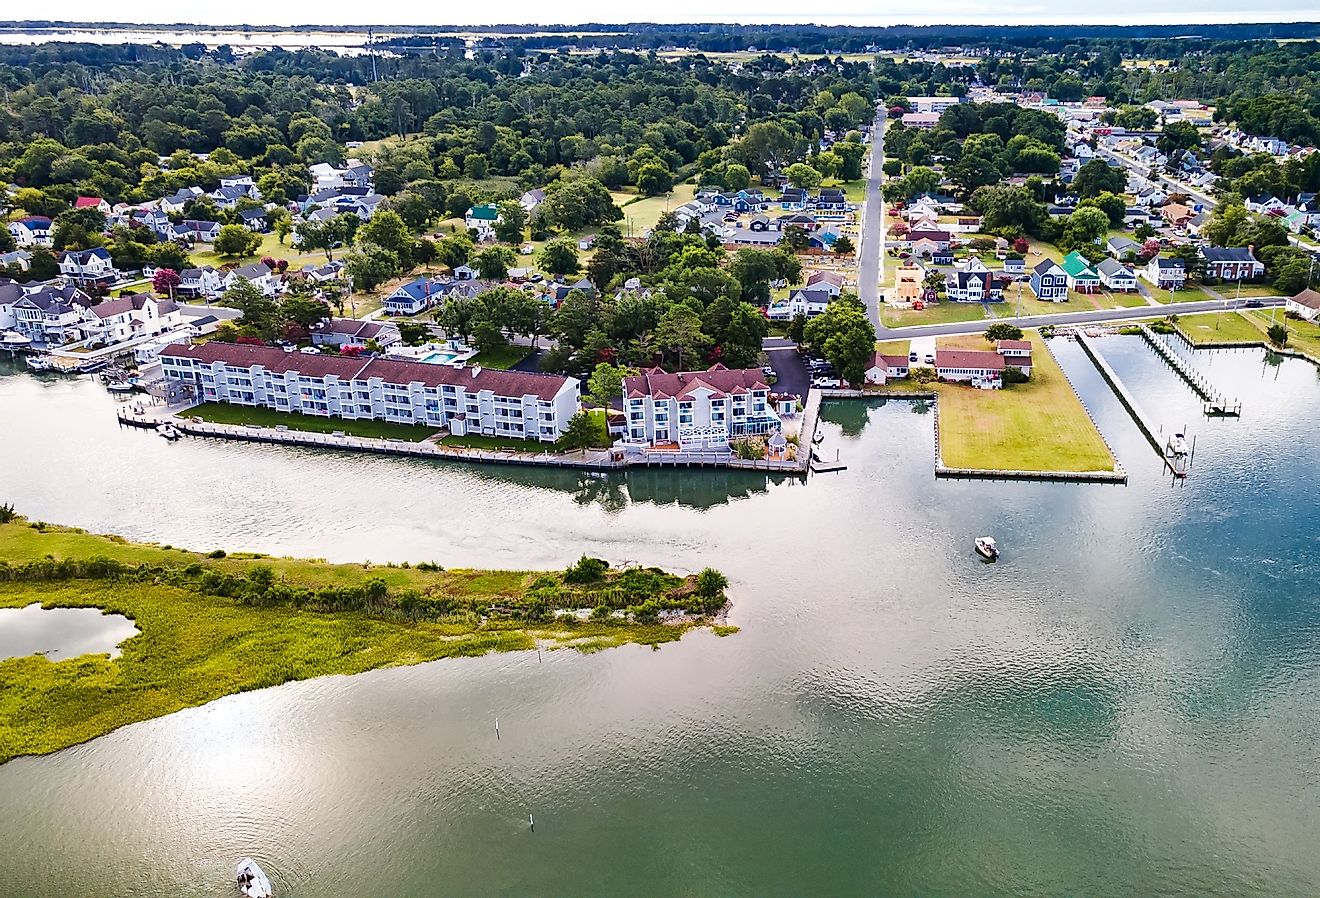 Chincoteague Island, marinas, houses and motels with parking lots.